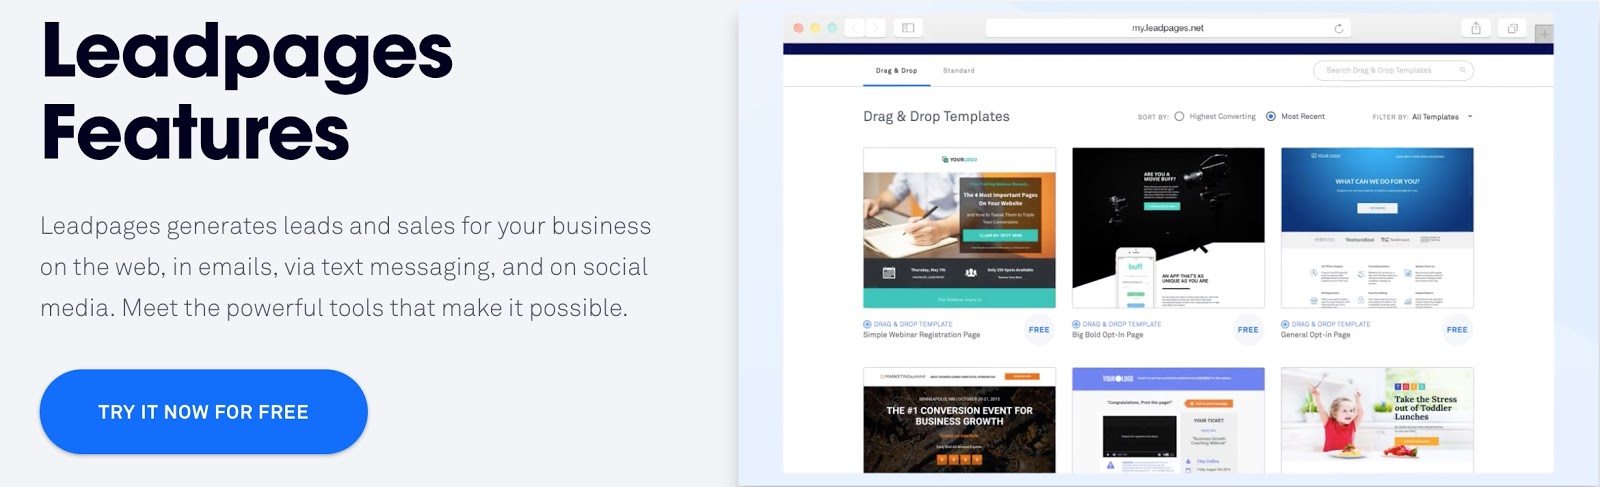 leadpages plugin for wordpress